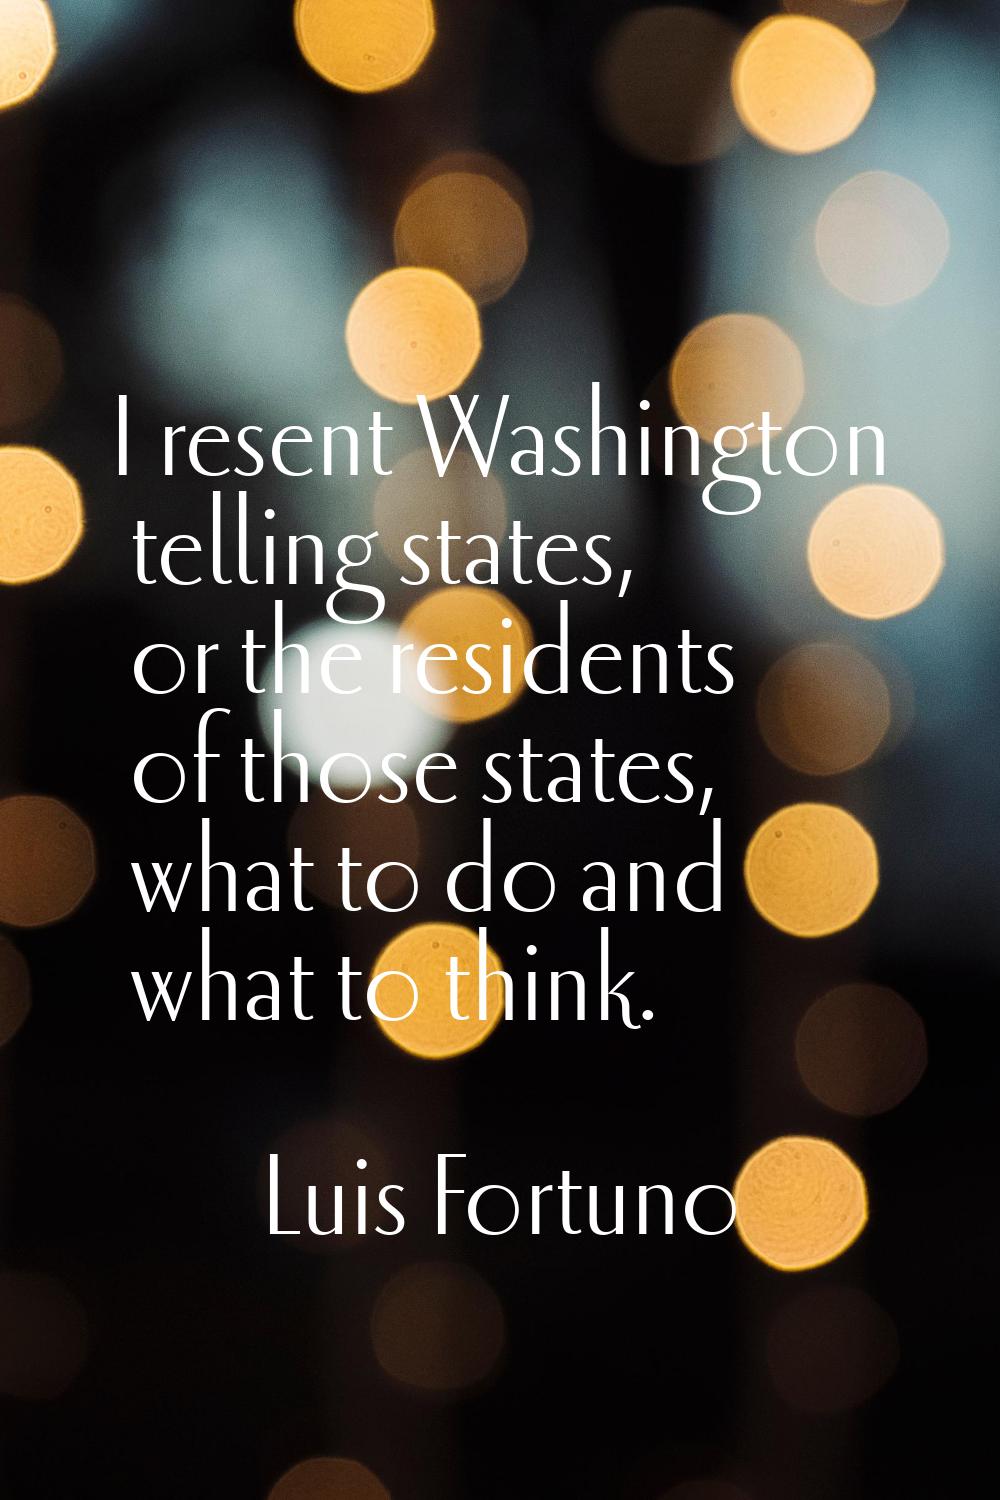 I resent Washington telling states, or the residents of those states, what to do and what to think.